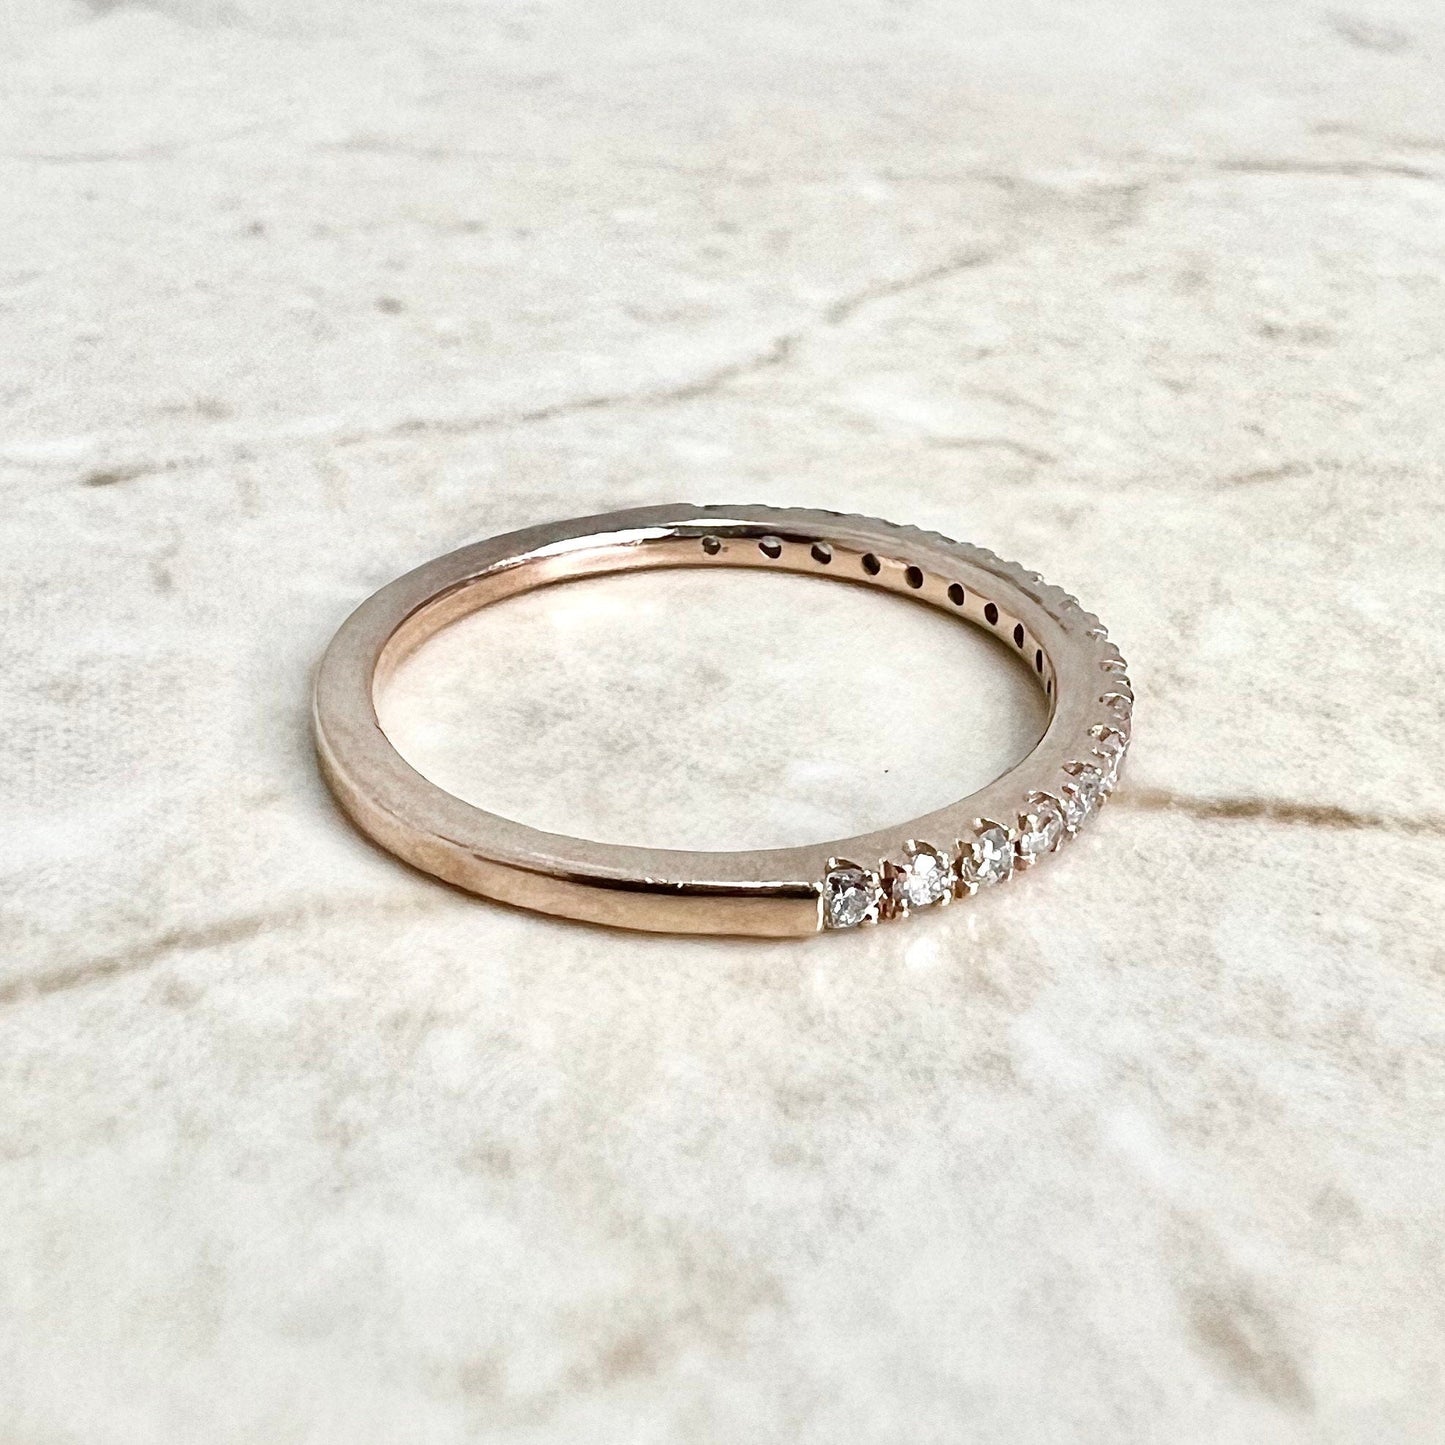 10K Half Eternity Diamond Band Ring - Rose Gold Wedding Band - Prong Set Band - Anniversary Ring - Diamond Wedding Ring - Best Gifts For Her